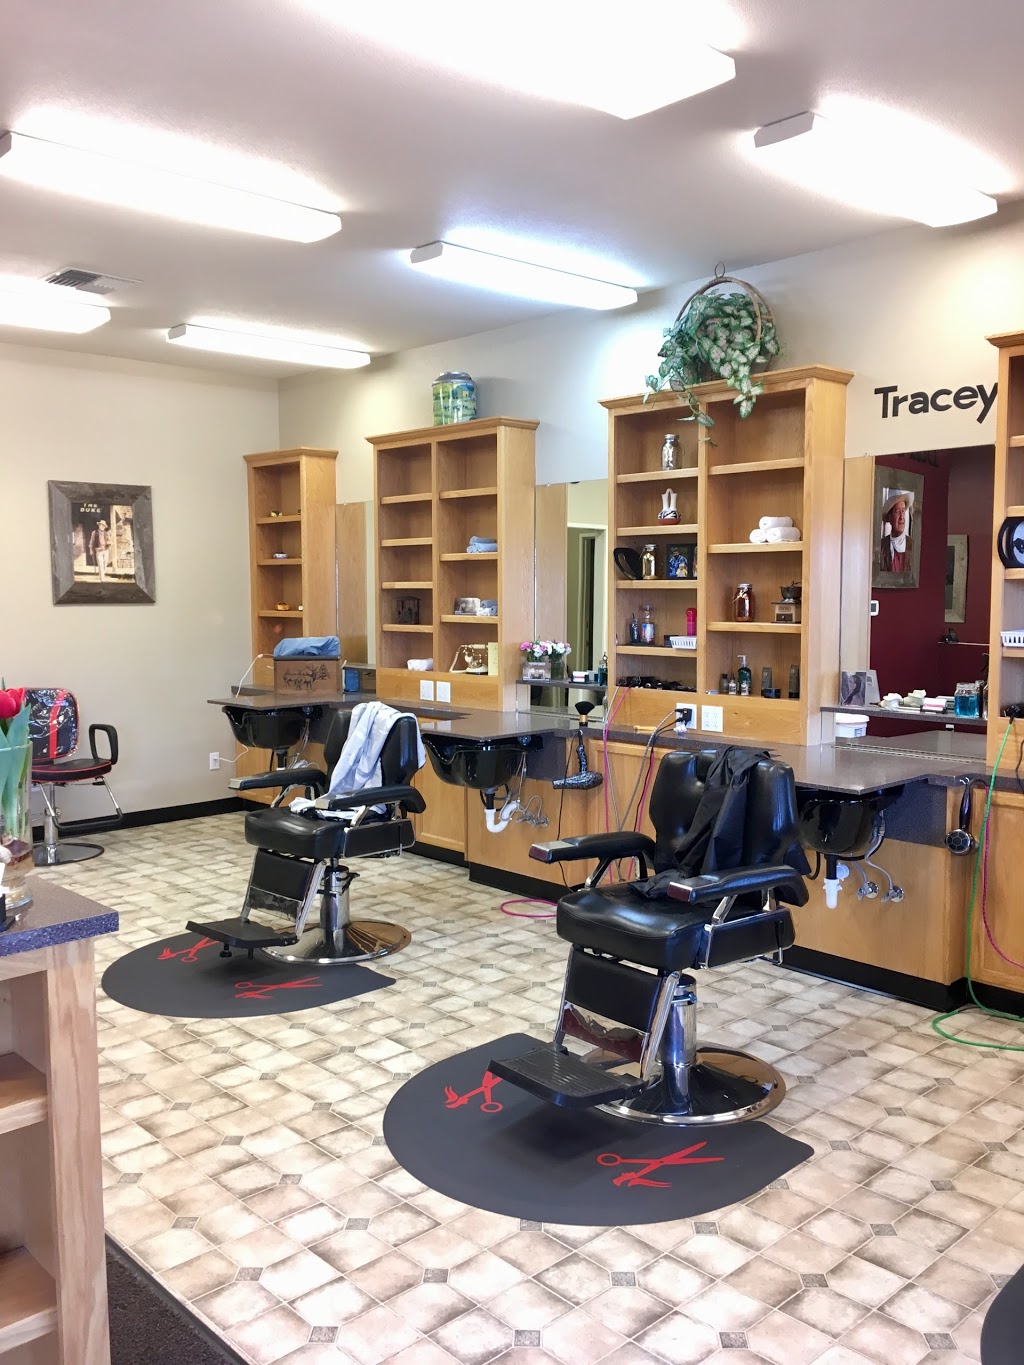 Hwy 30 Barbers | 51577 Columbia River Hwy, Scappoose, OR 97056, USA | Phone: (503) 543-2417